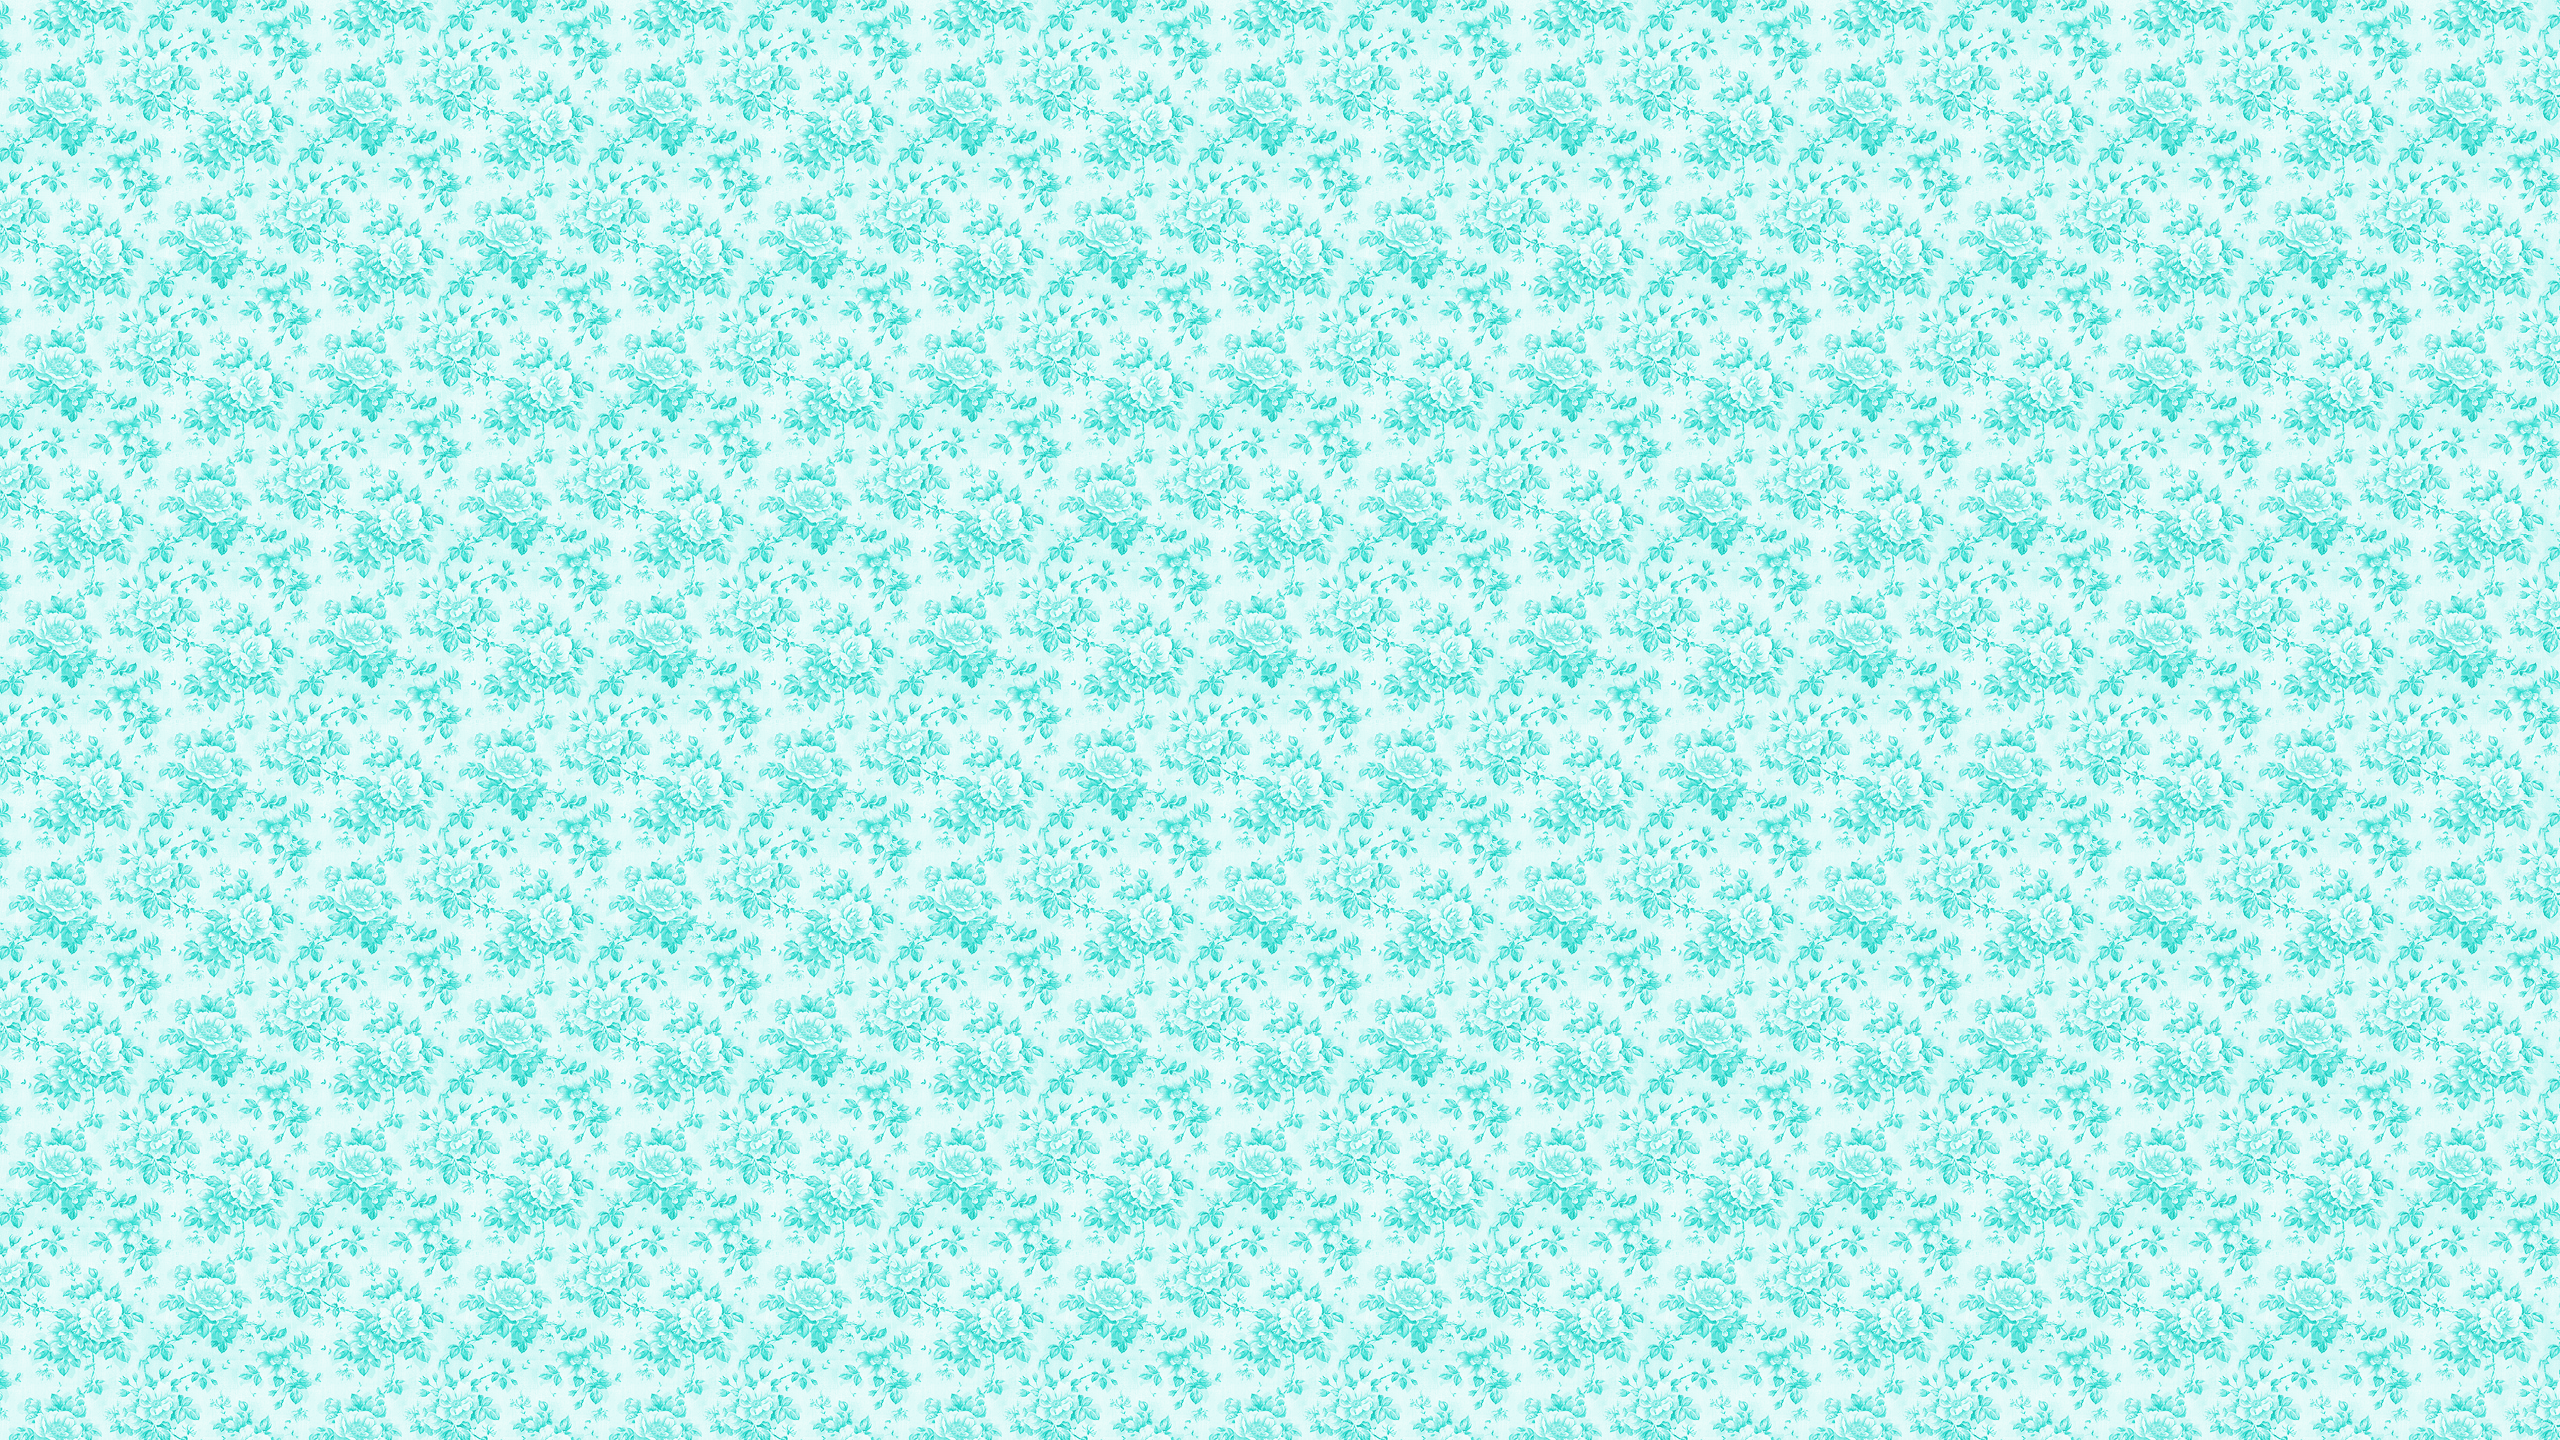 A mint green wallpaper with small flowers and a white background - Mint green